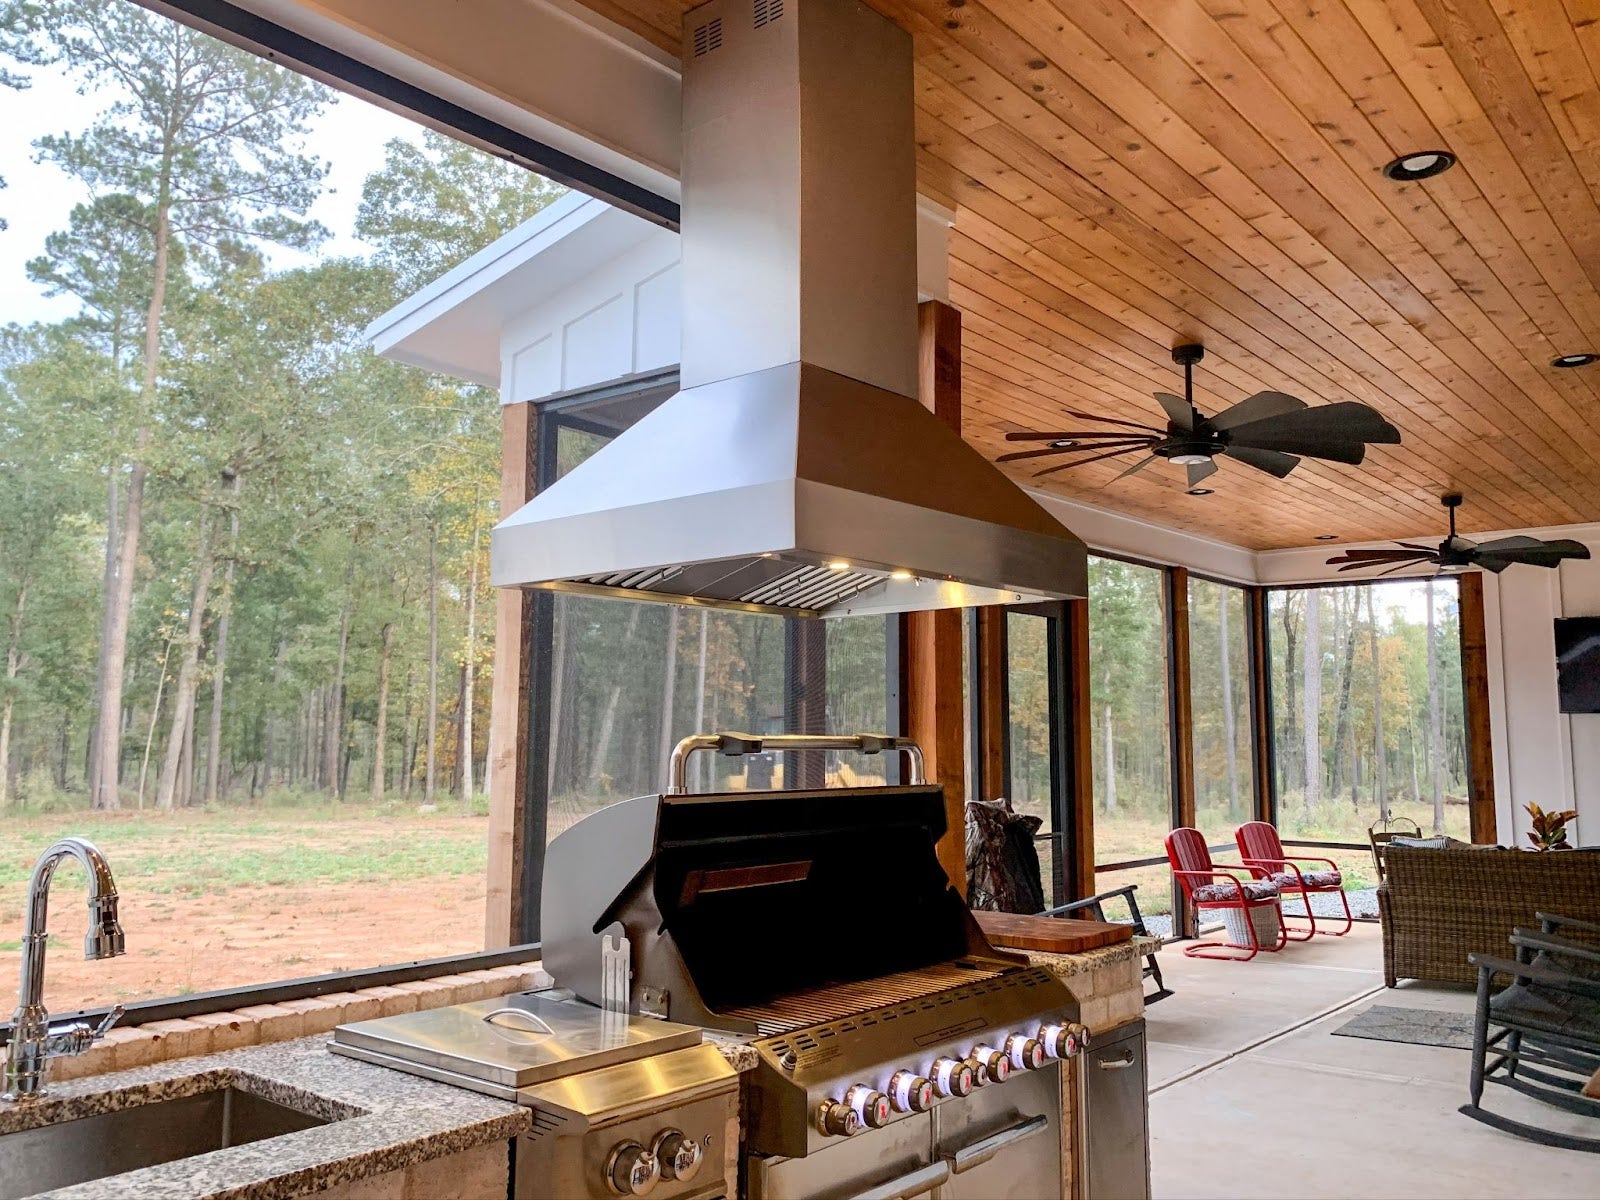 Tranquil outdoor entertainment area featuring a high-end grill, wood ceiling, and panoramic views of a pine forest.